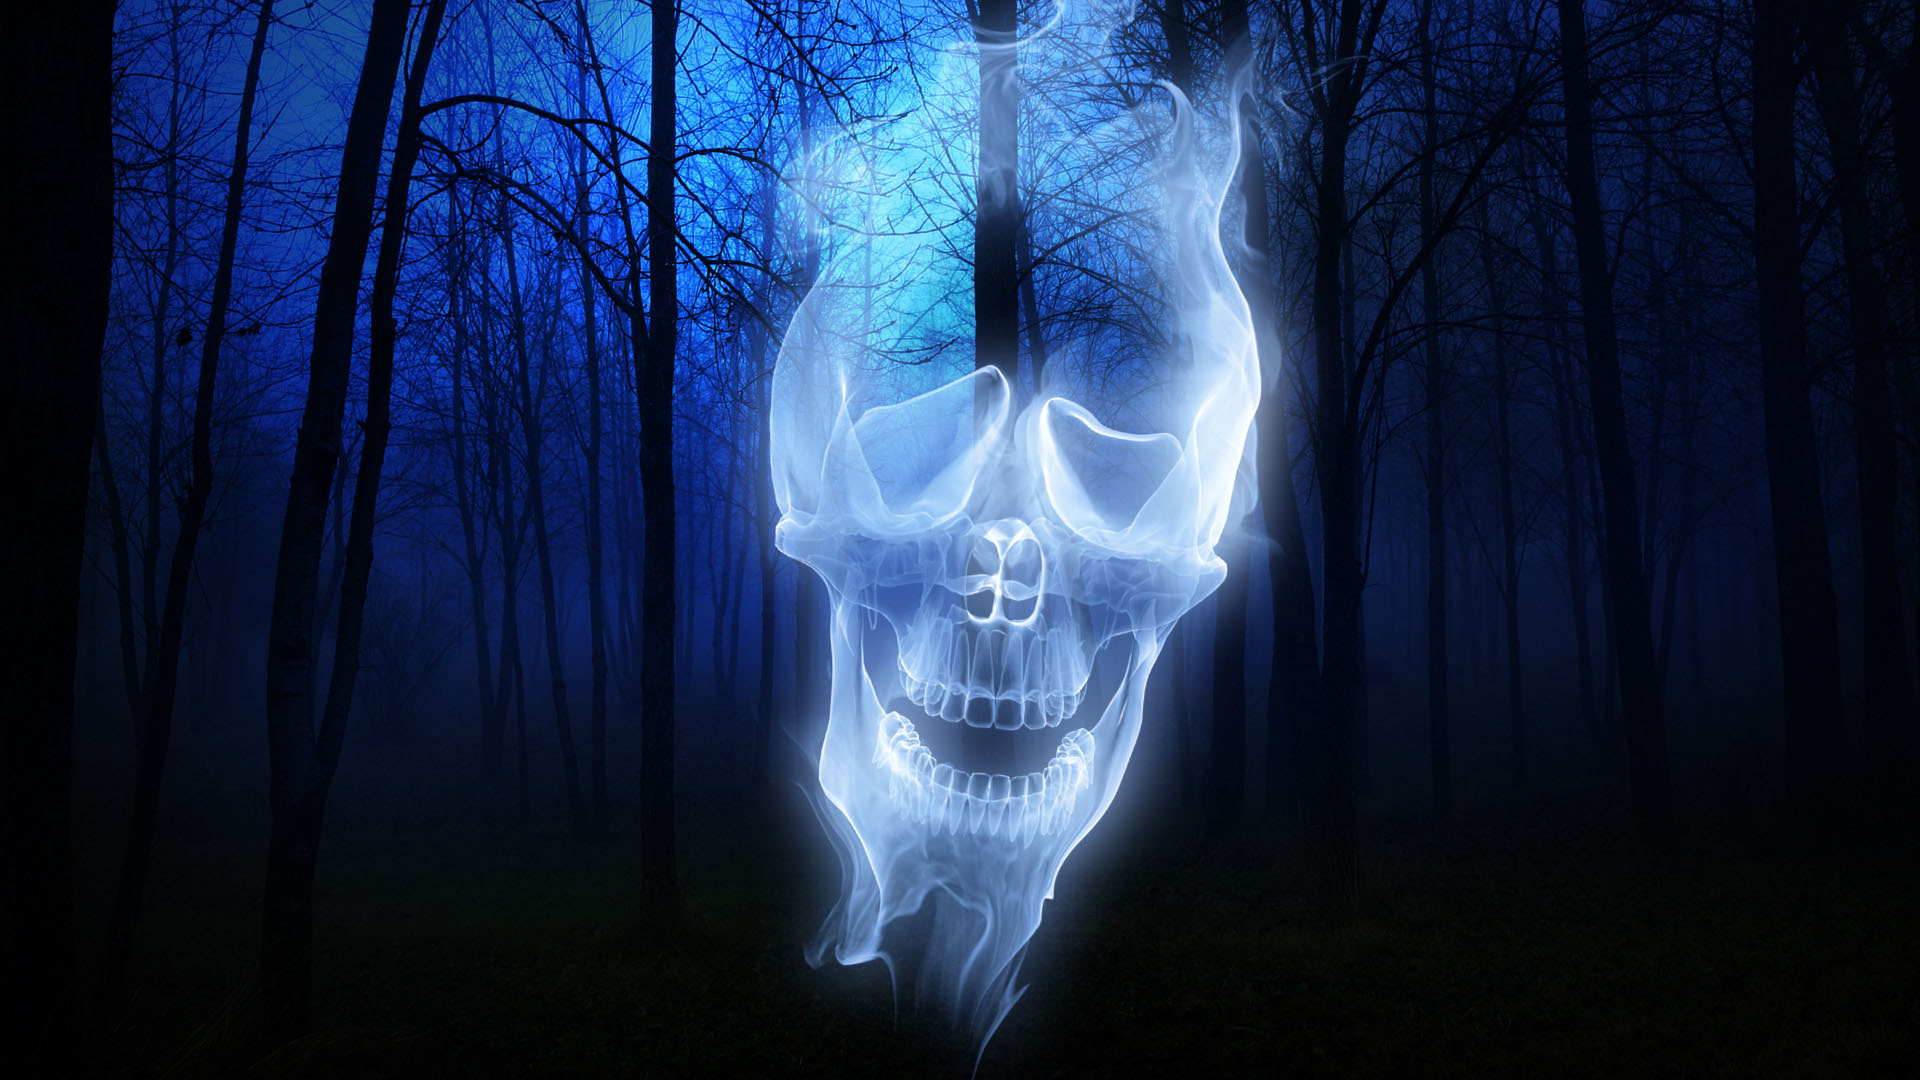 Forest Skull Ghost wallpapers Forest Skull Ghost stock photos